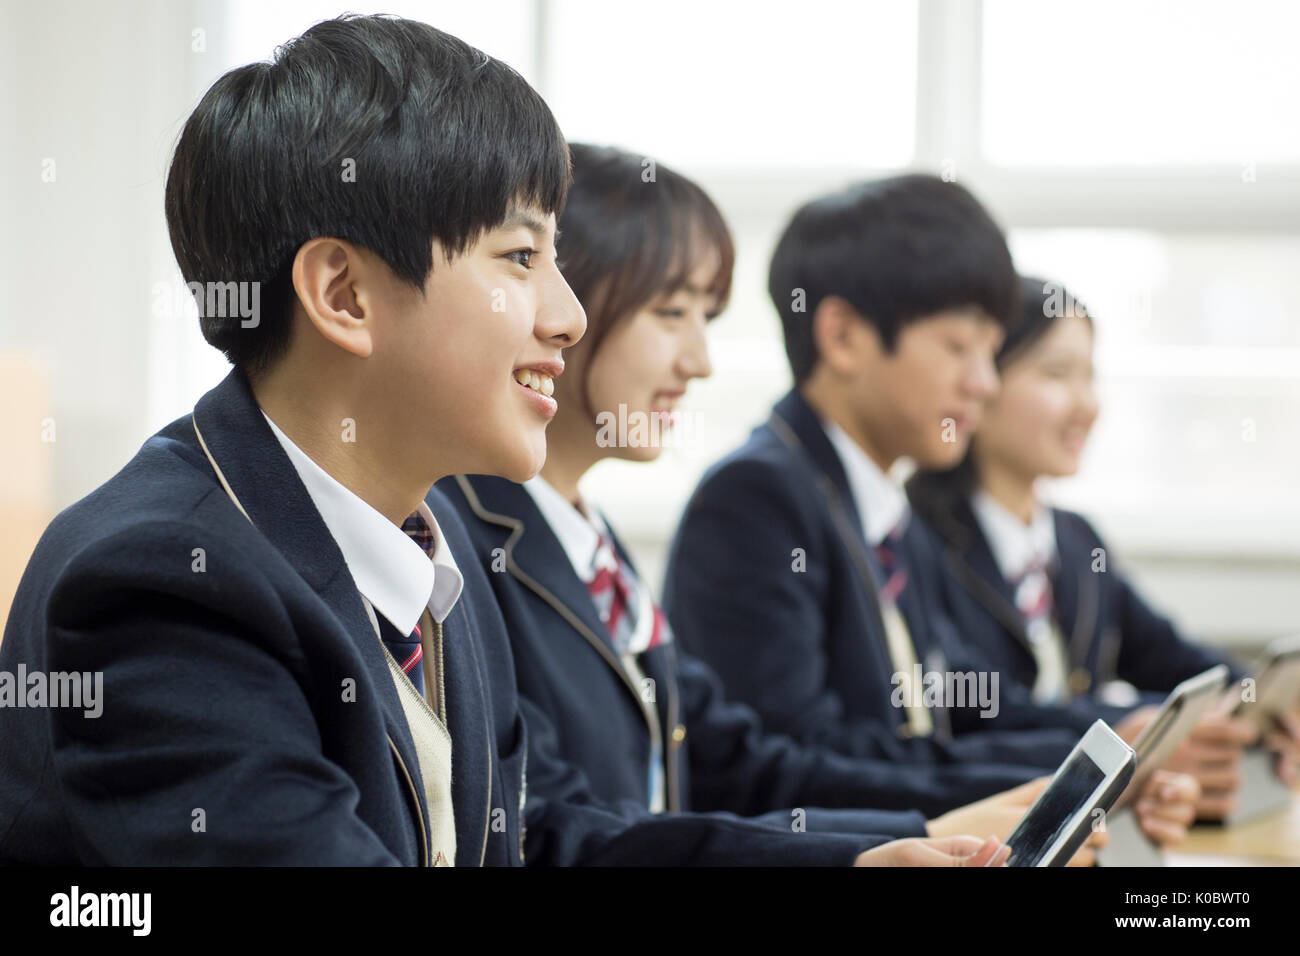 Side view portrait of smiling school boy and his classmates with electric tablets taking class Stock Photo